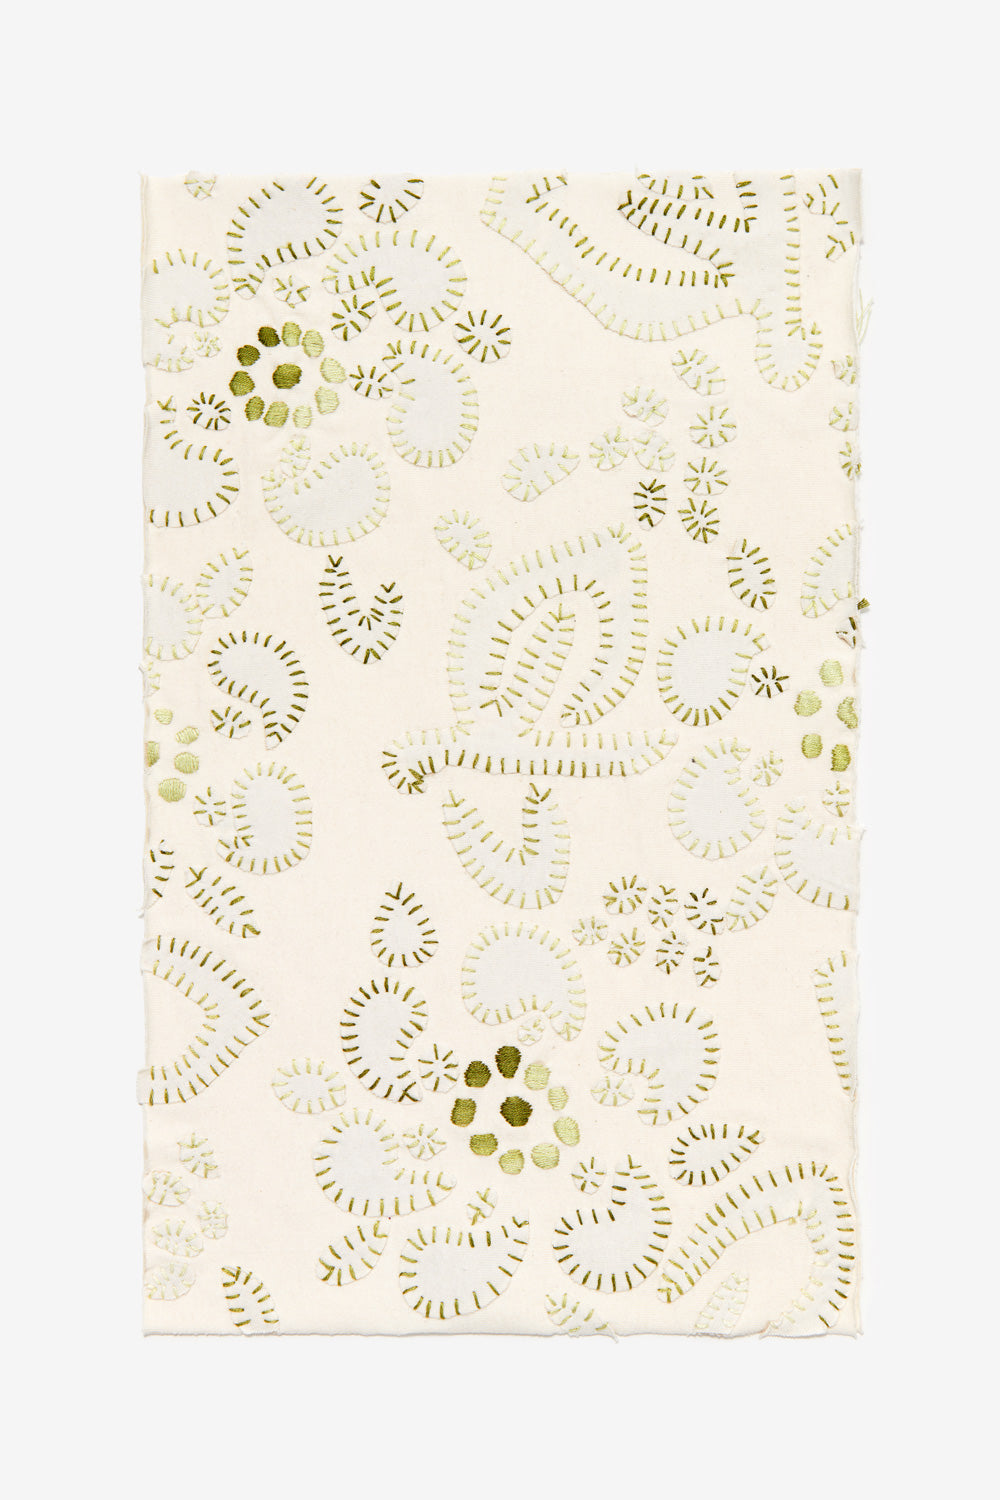 Swatch in Natural featuring the Daisy stencil with whipstitch appliqué and satin stitching.